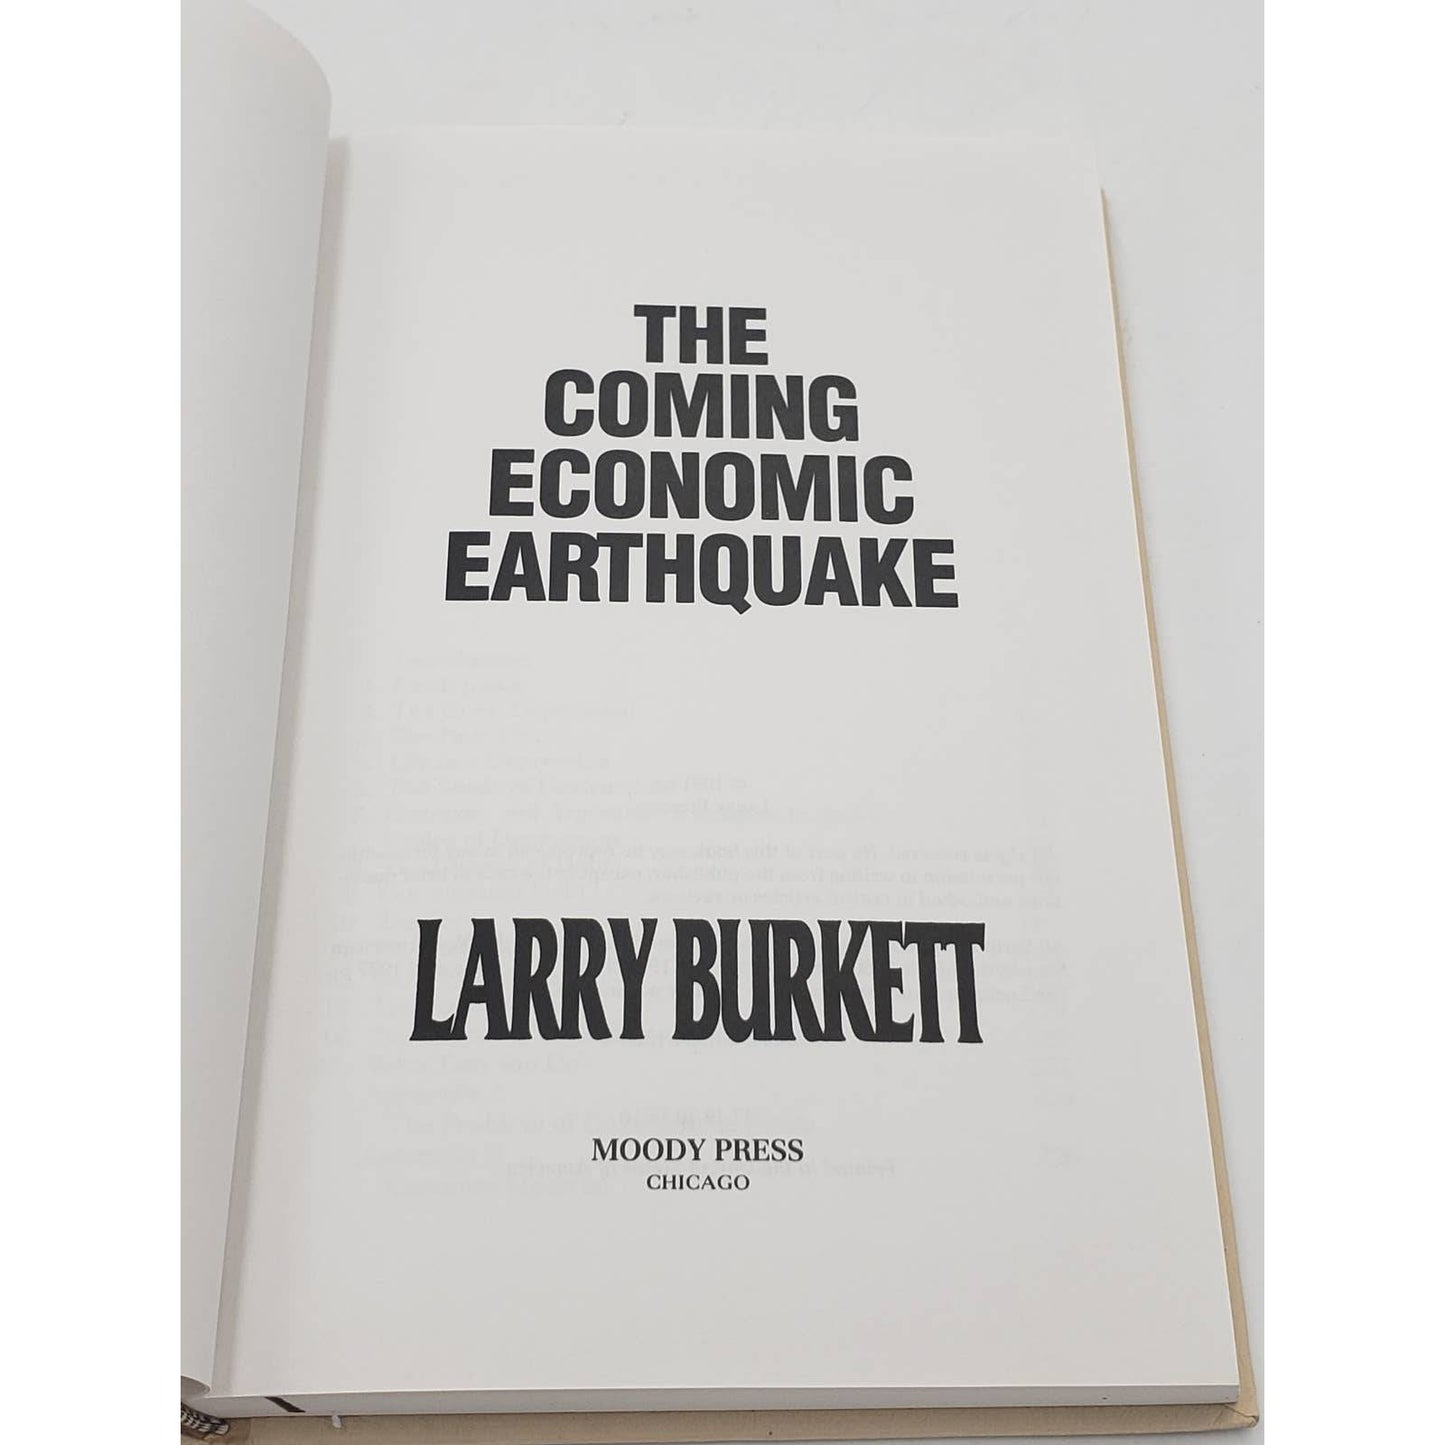 The Coming Economic Earthquake by Larry Burkett - How inflation affects people